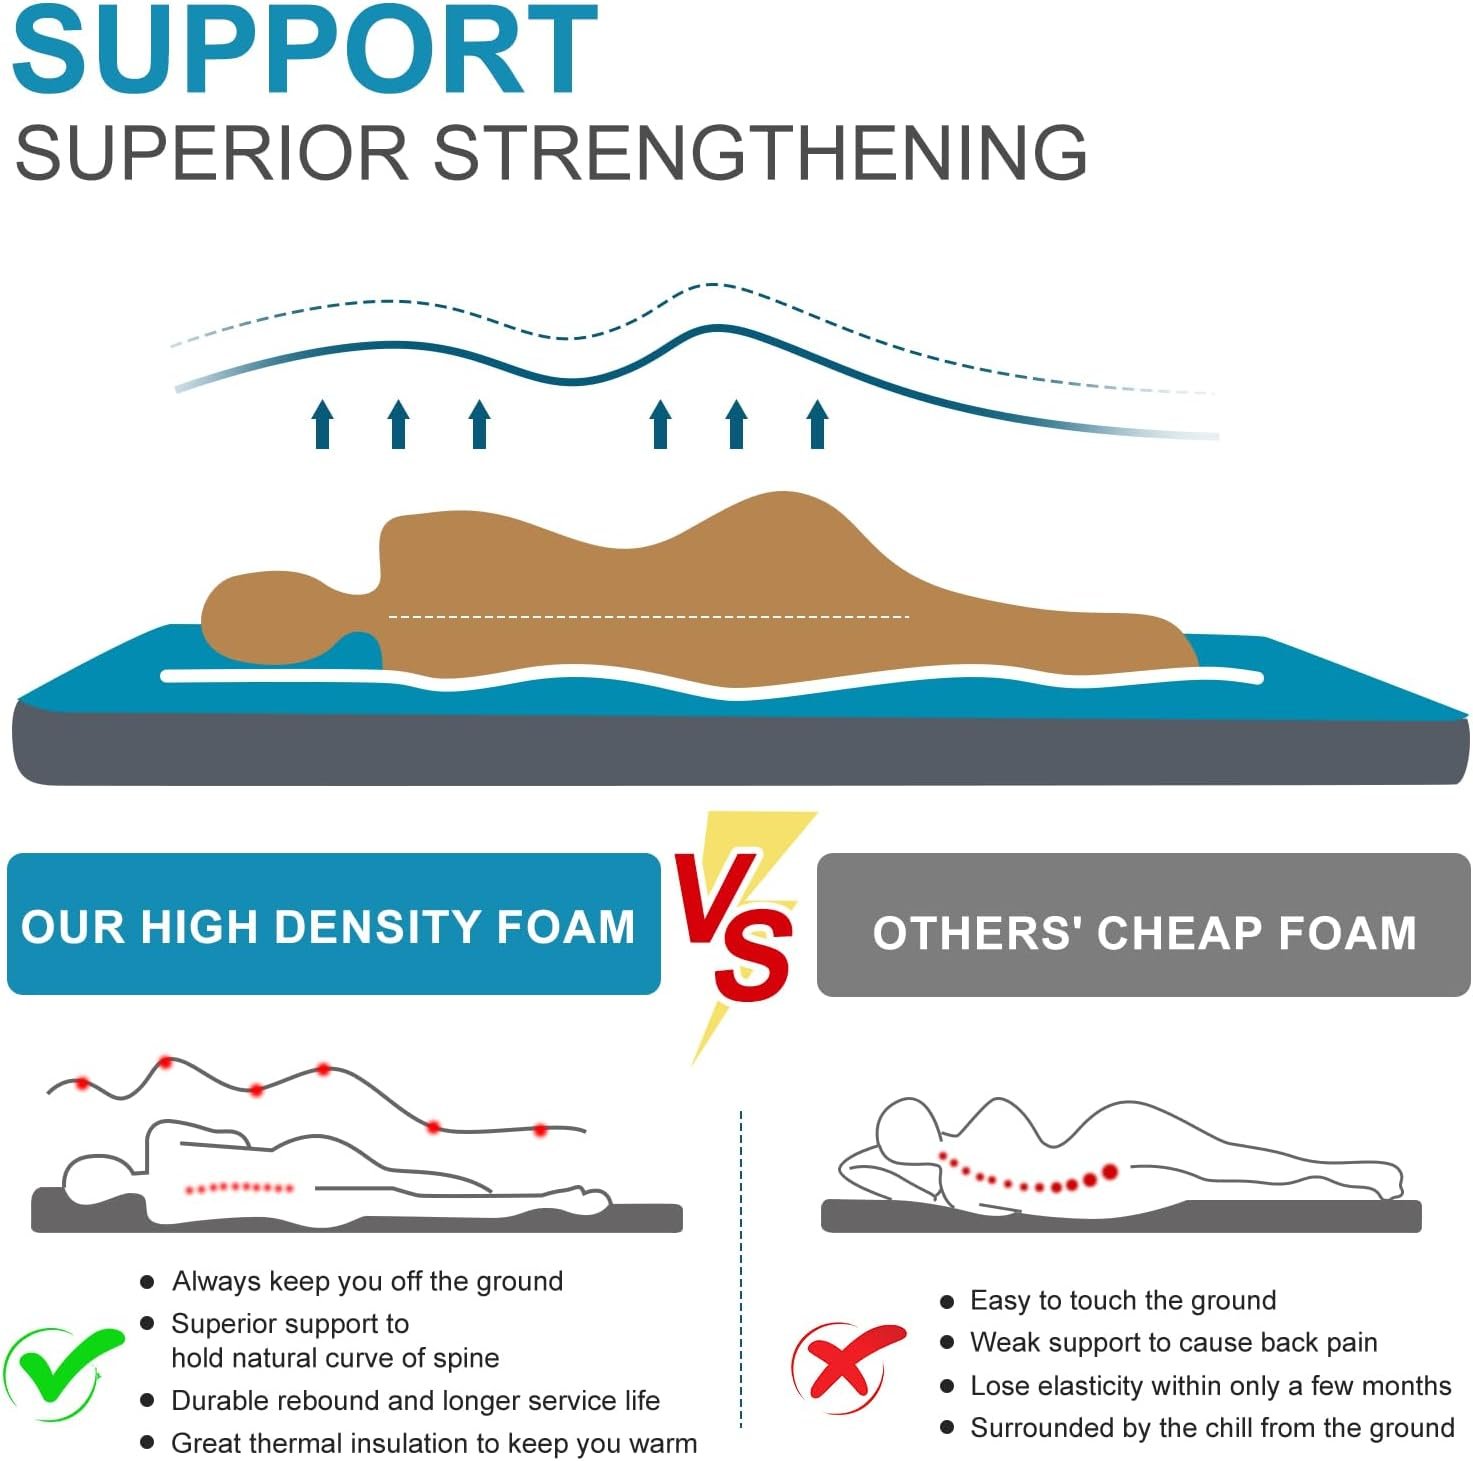 Sleeping Pad Review: Comparing 3 Top Camping Options